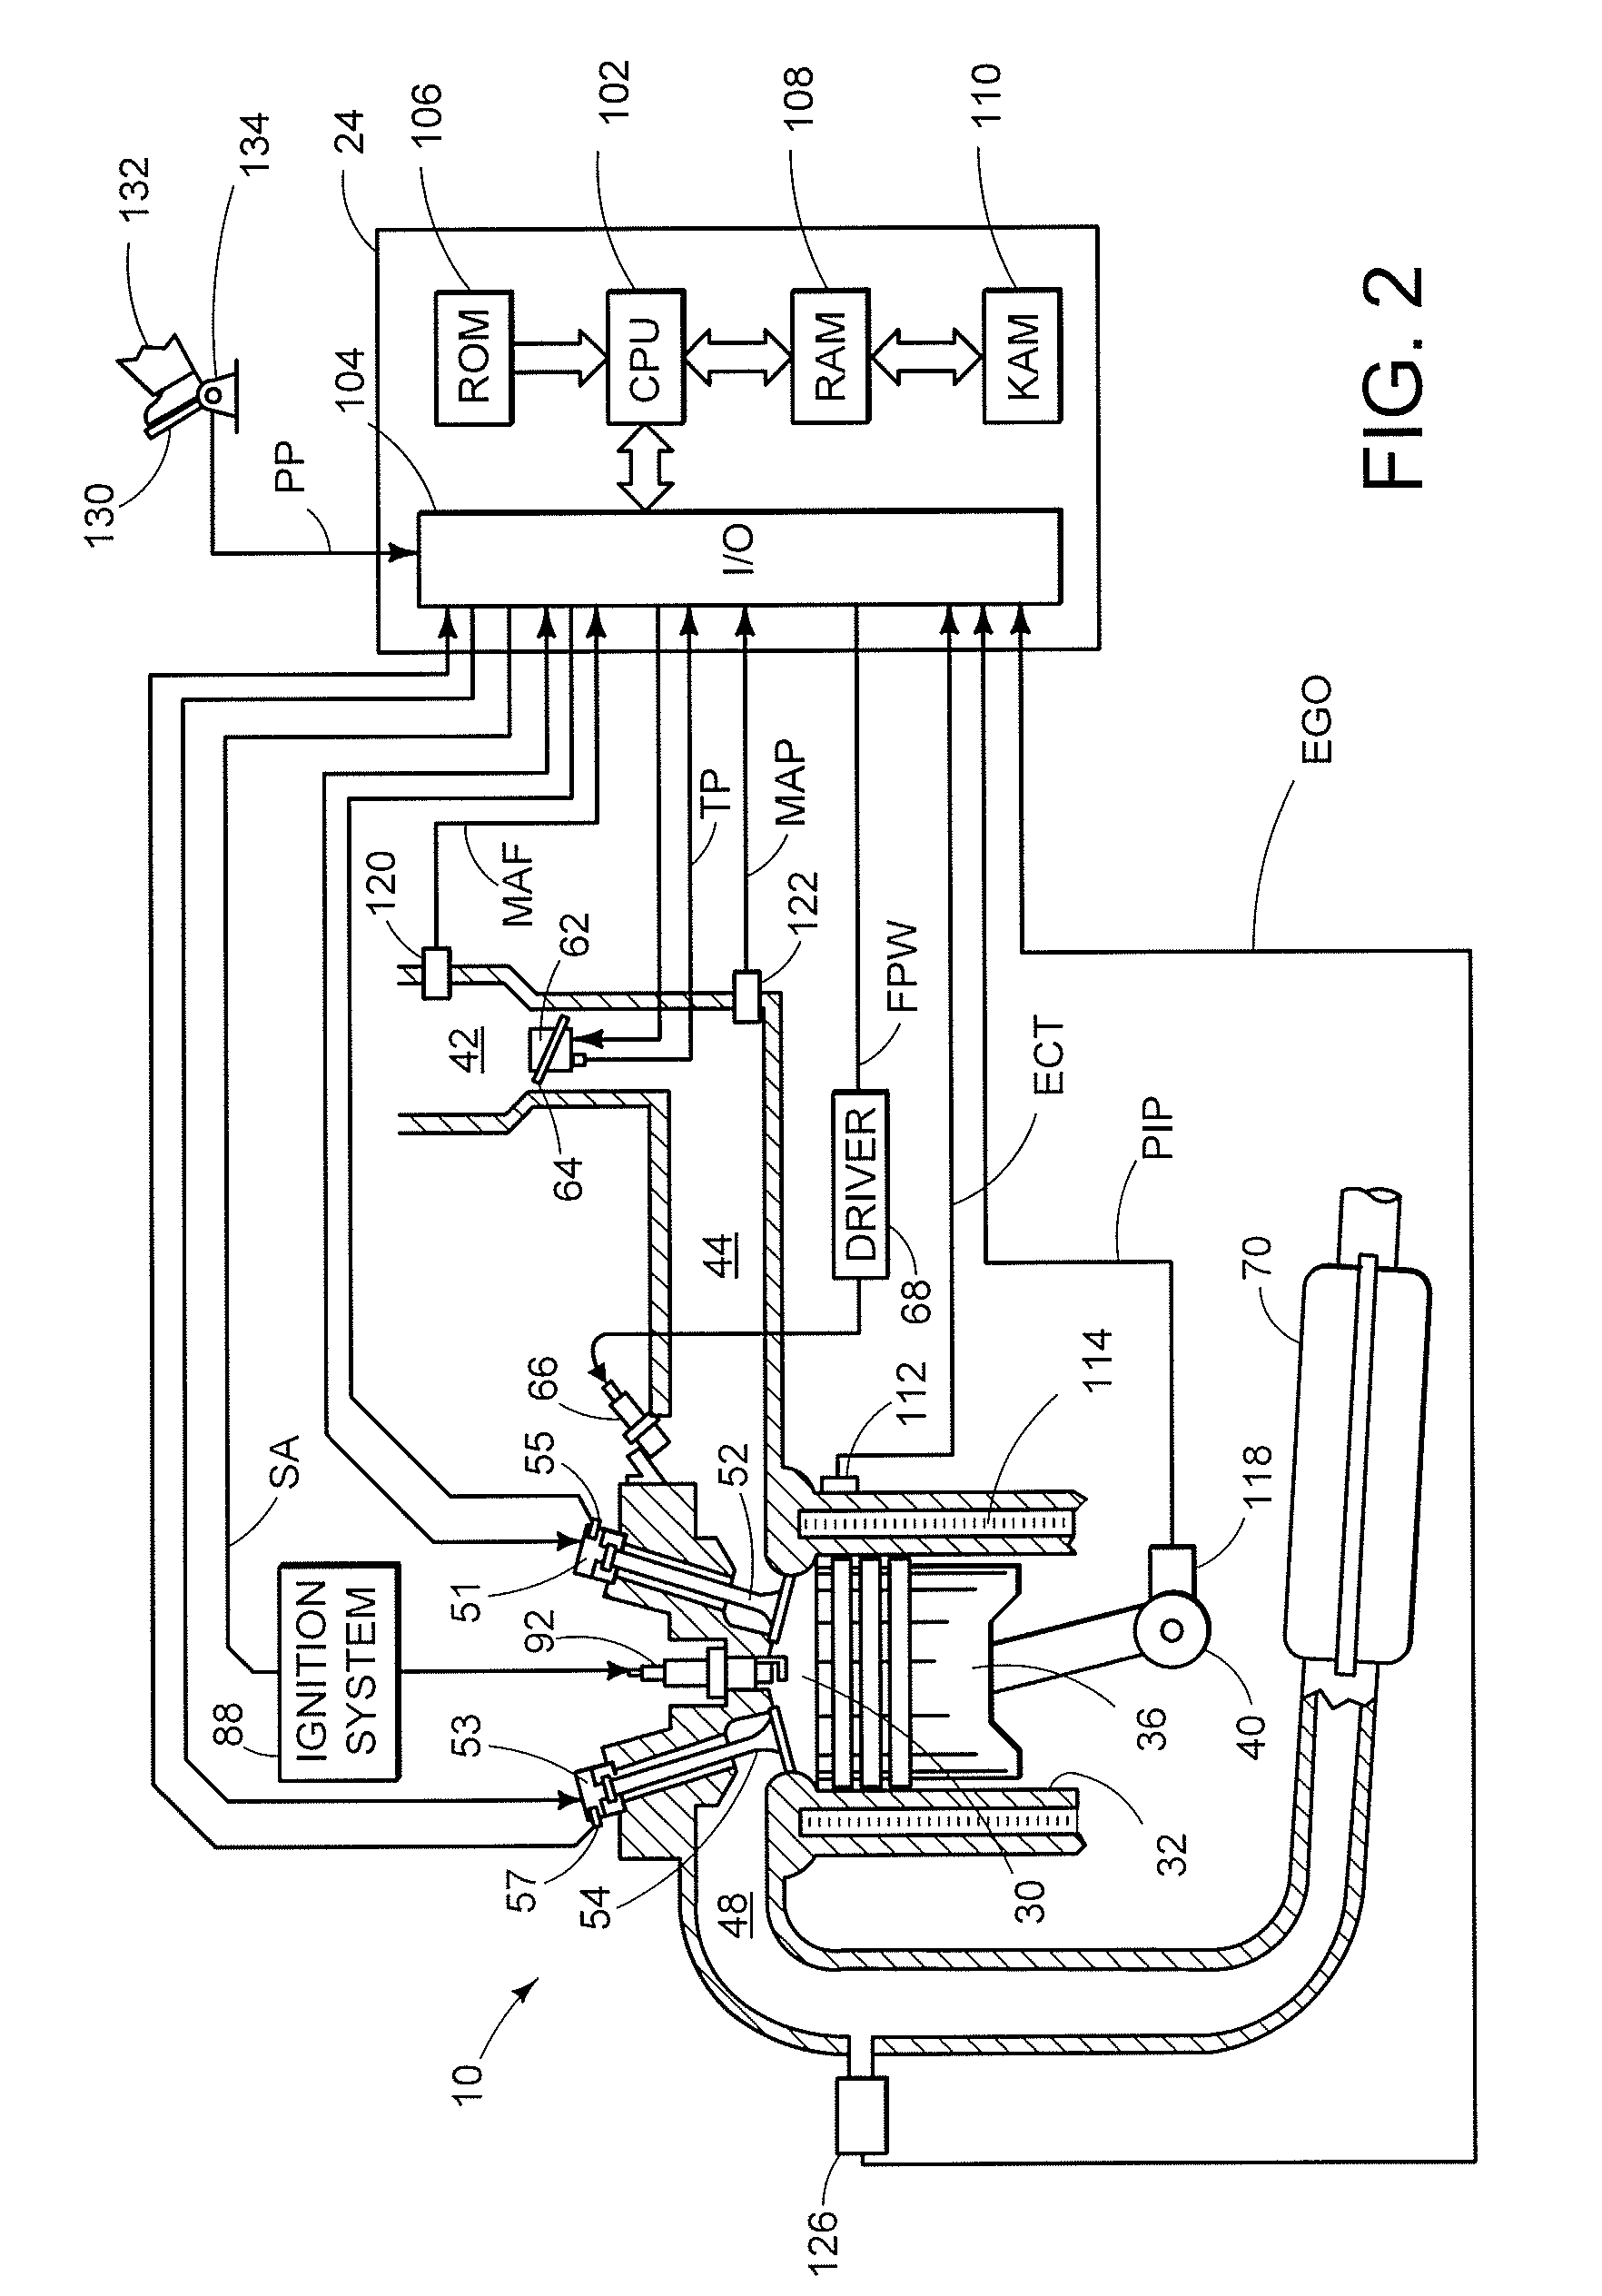 System and Method of Extending Regenerative Braking in a Hybrid Electric Vehicle